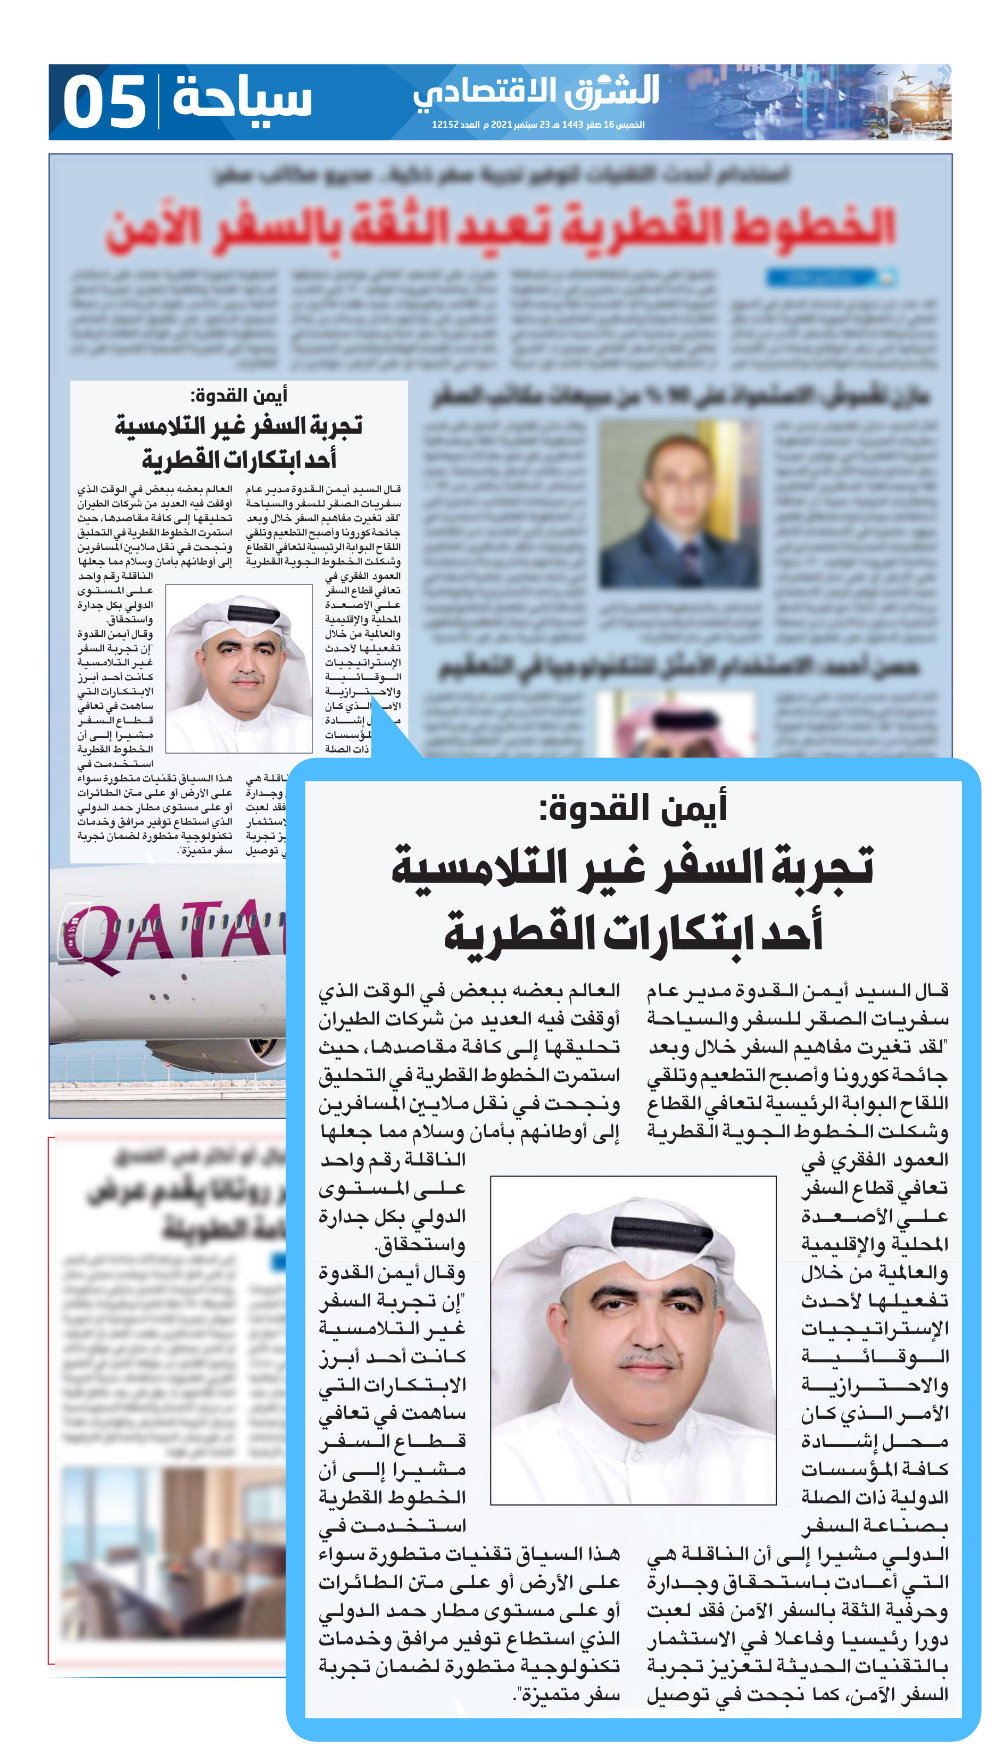 Ayman Al Qudwa on the State of Travel in September 2021